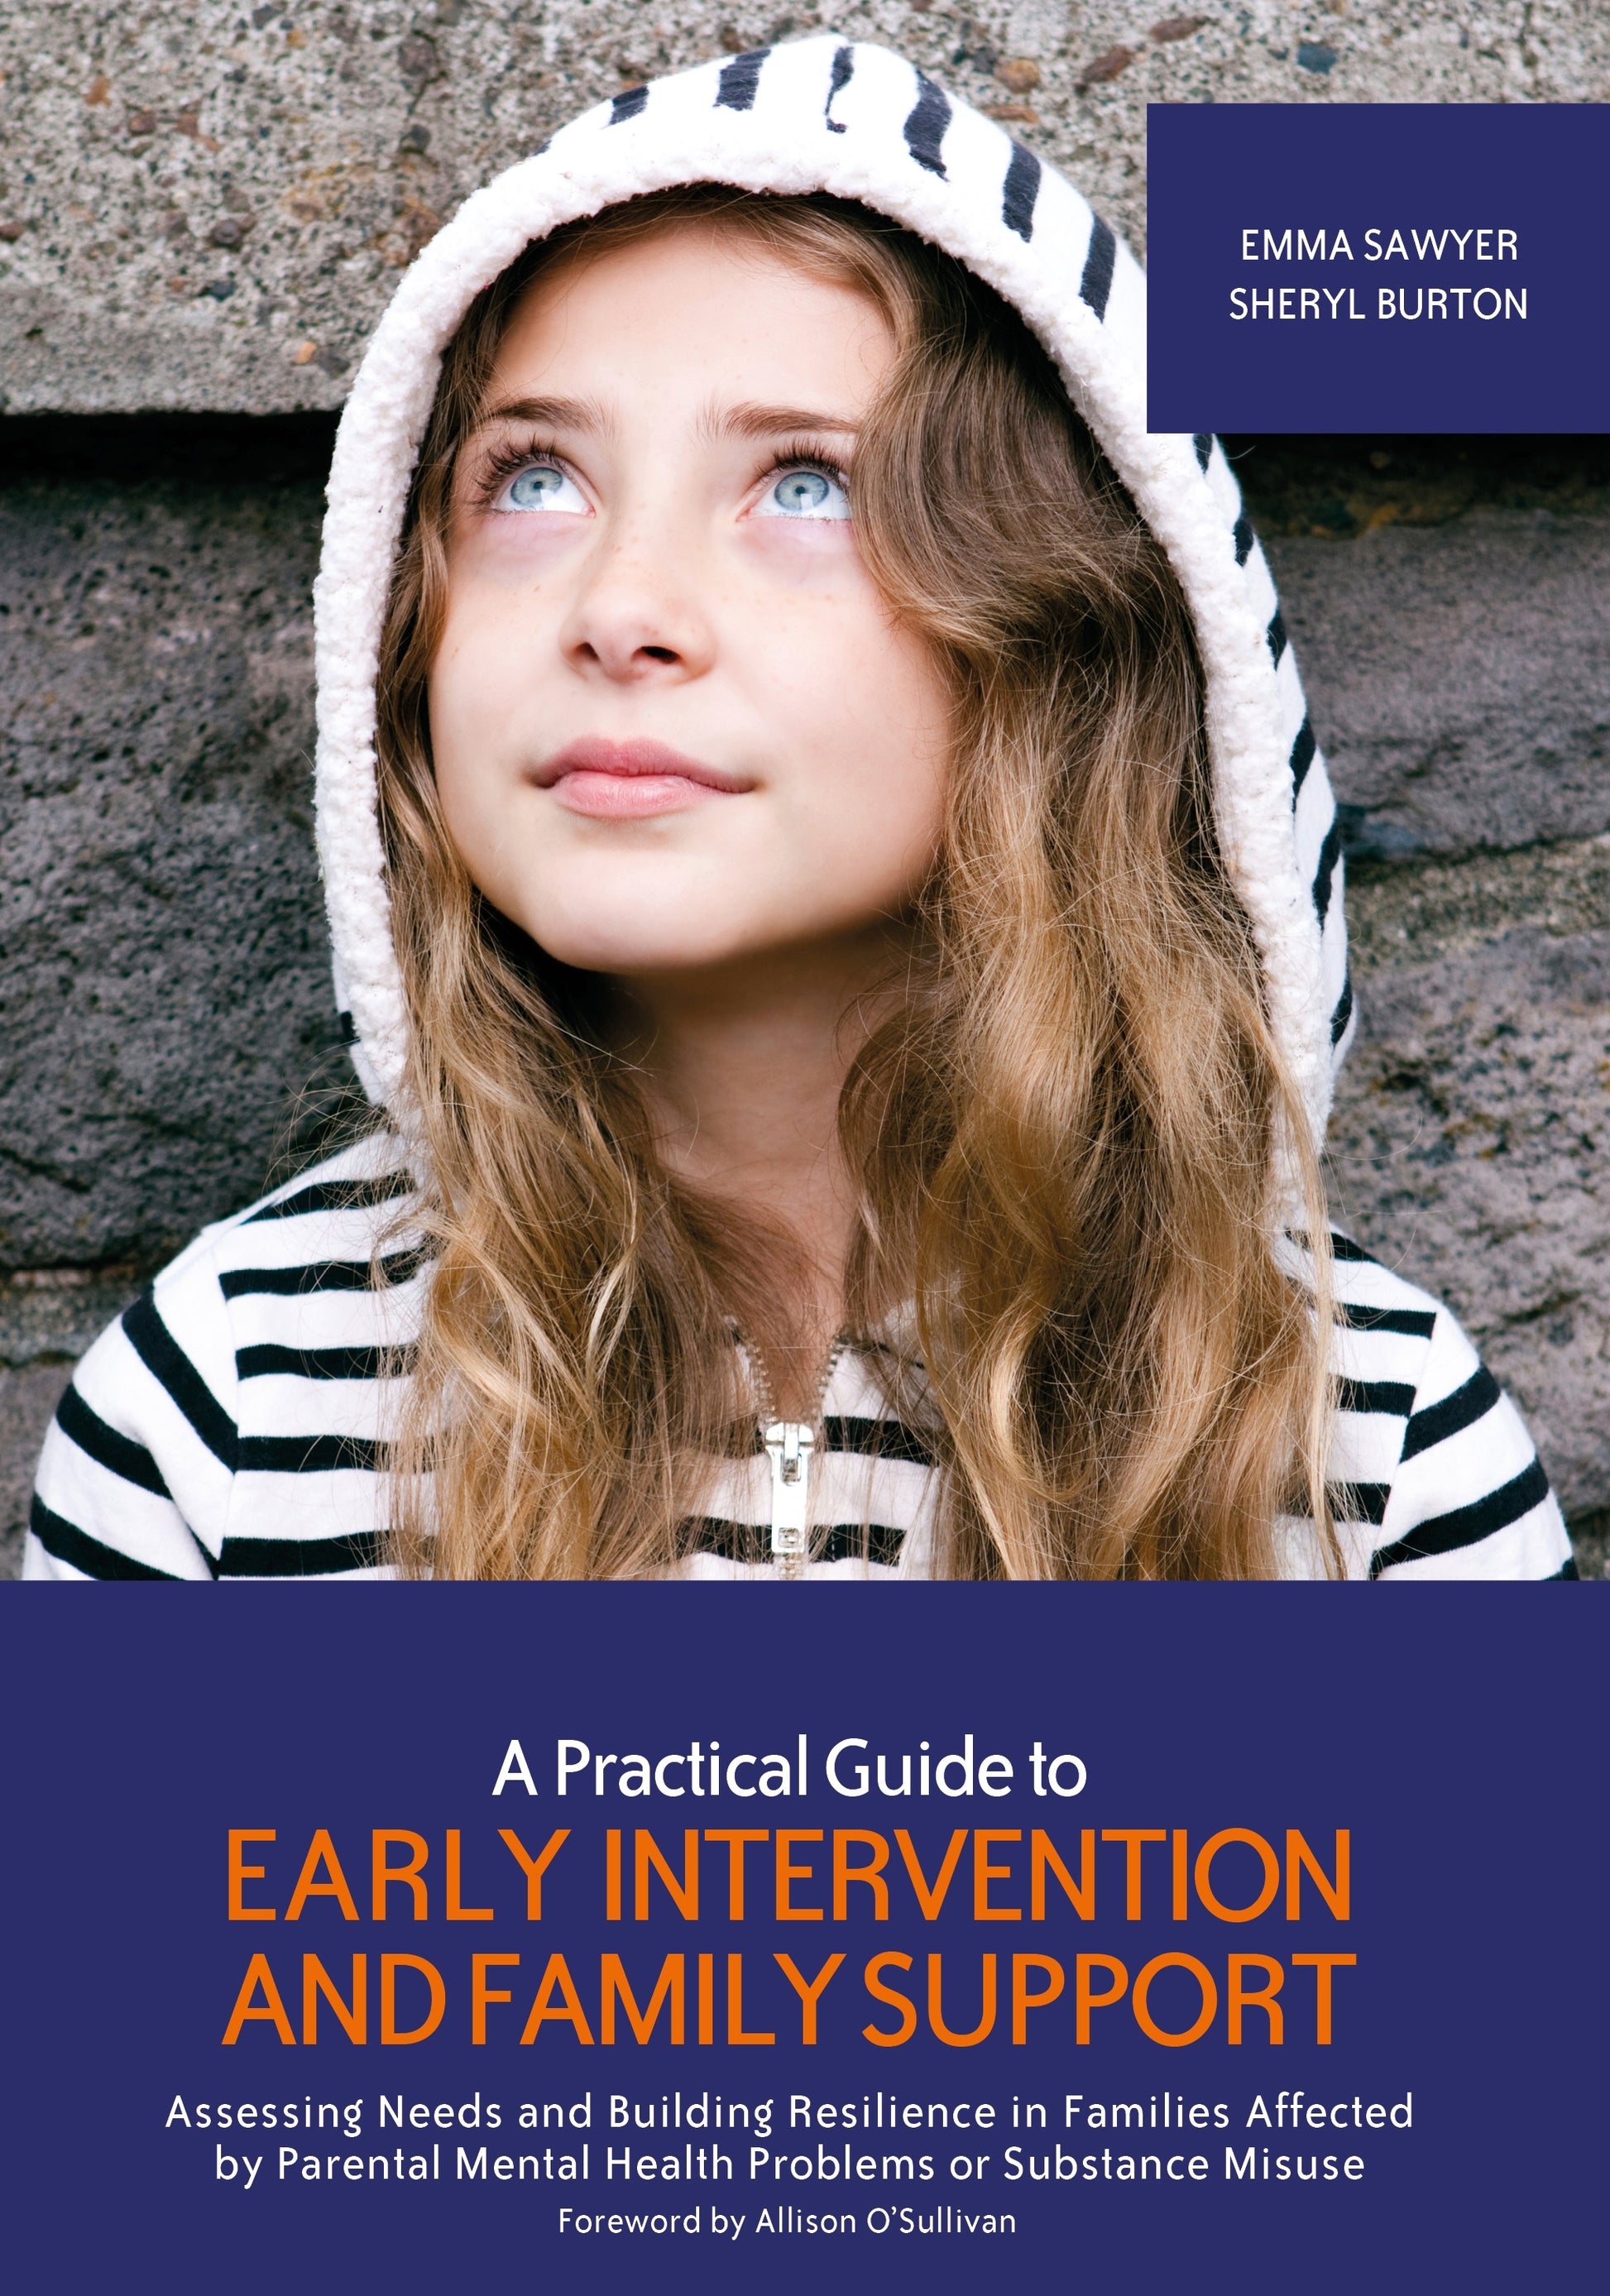 A Practical Guide to Early Intervention and Family Support by Allison O’Sullivan, Sheryl Burton, Emma Sawyer